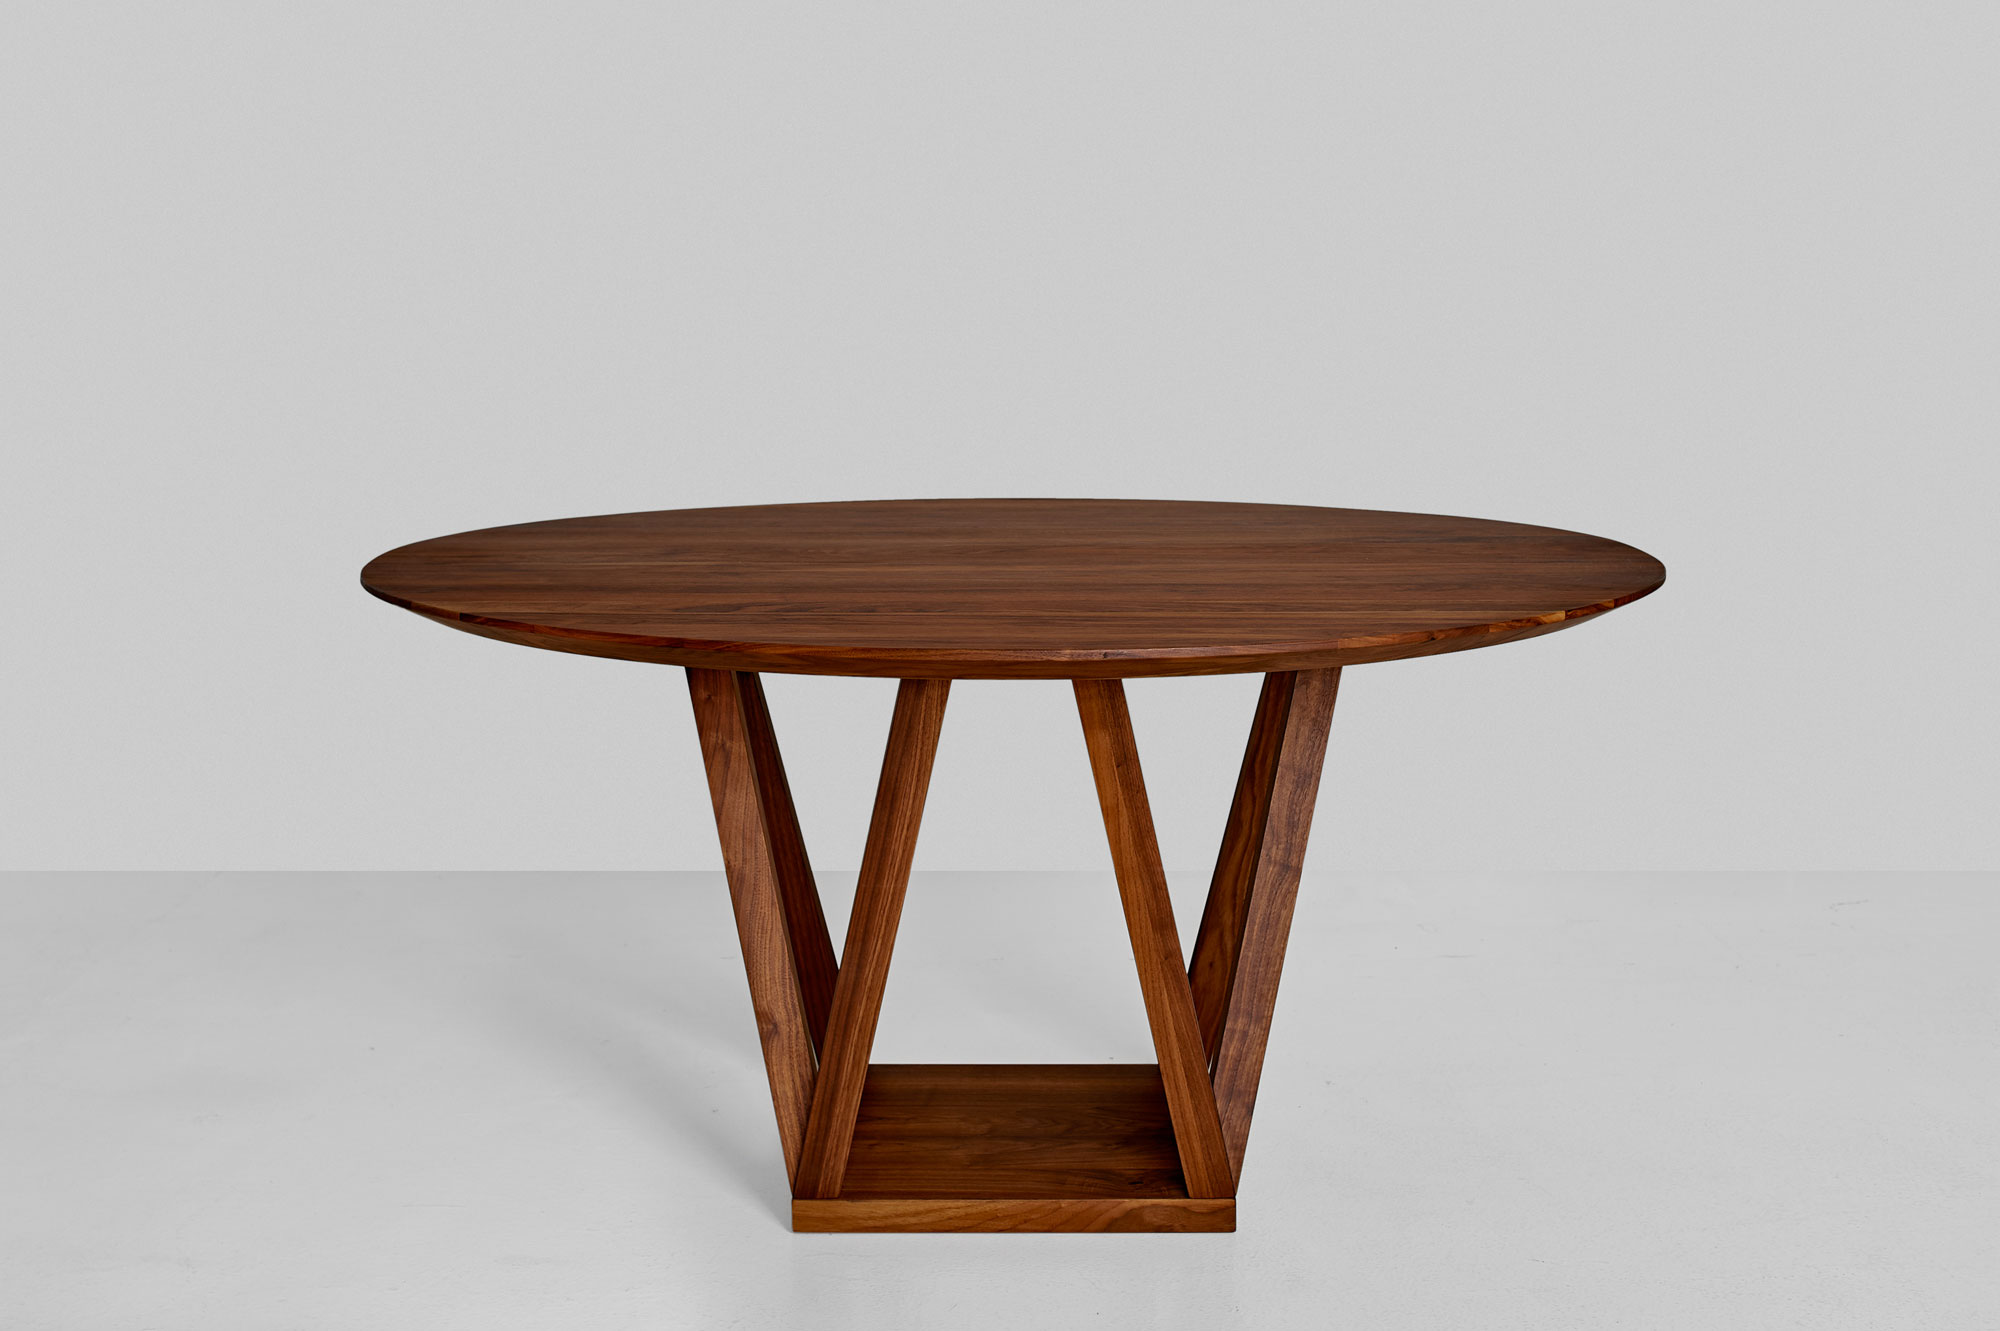 Round Designer Table CREO 0988 custom made in solid wood by vitamin design